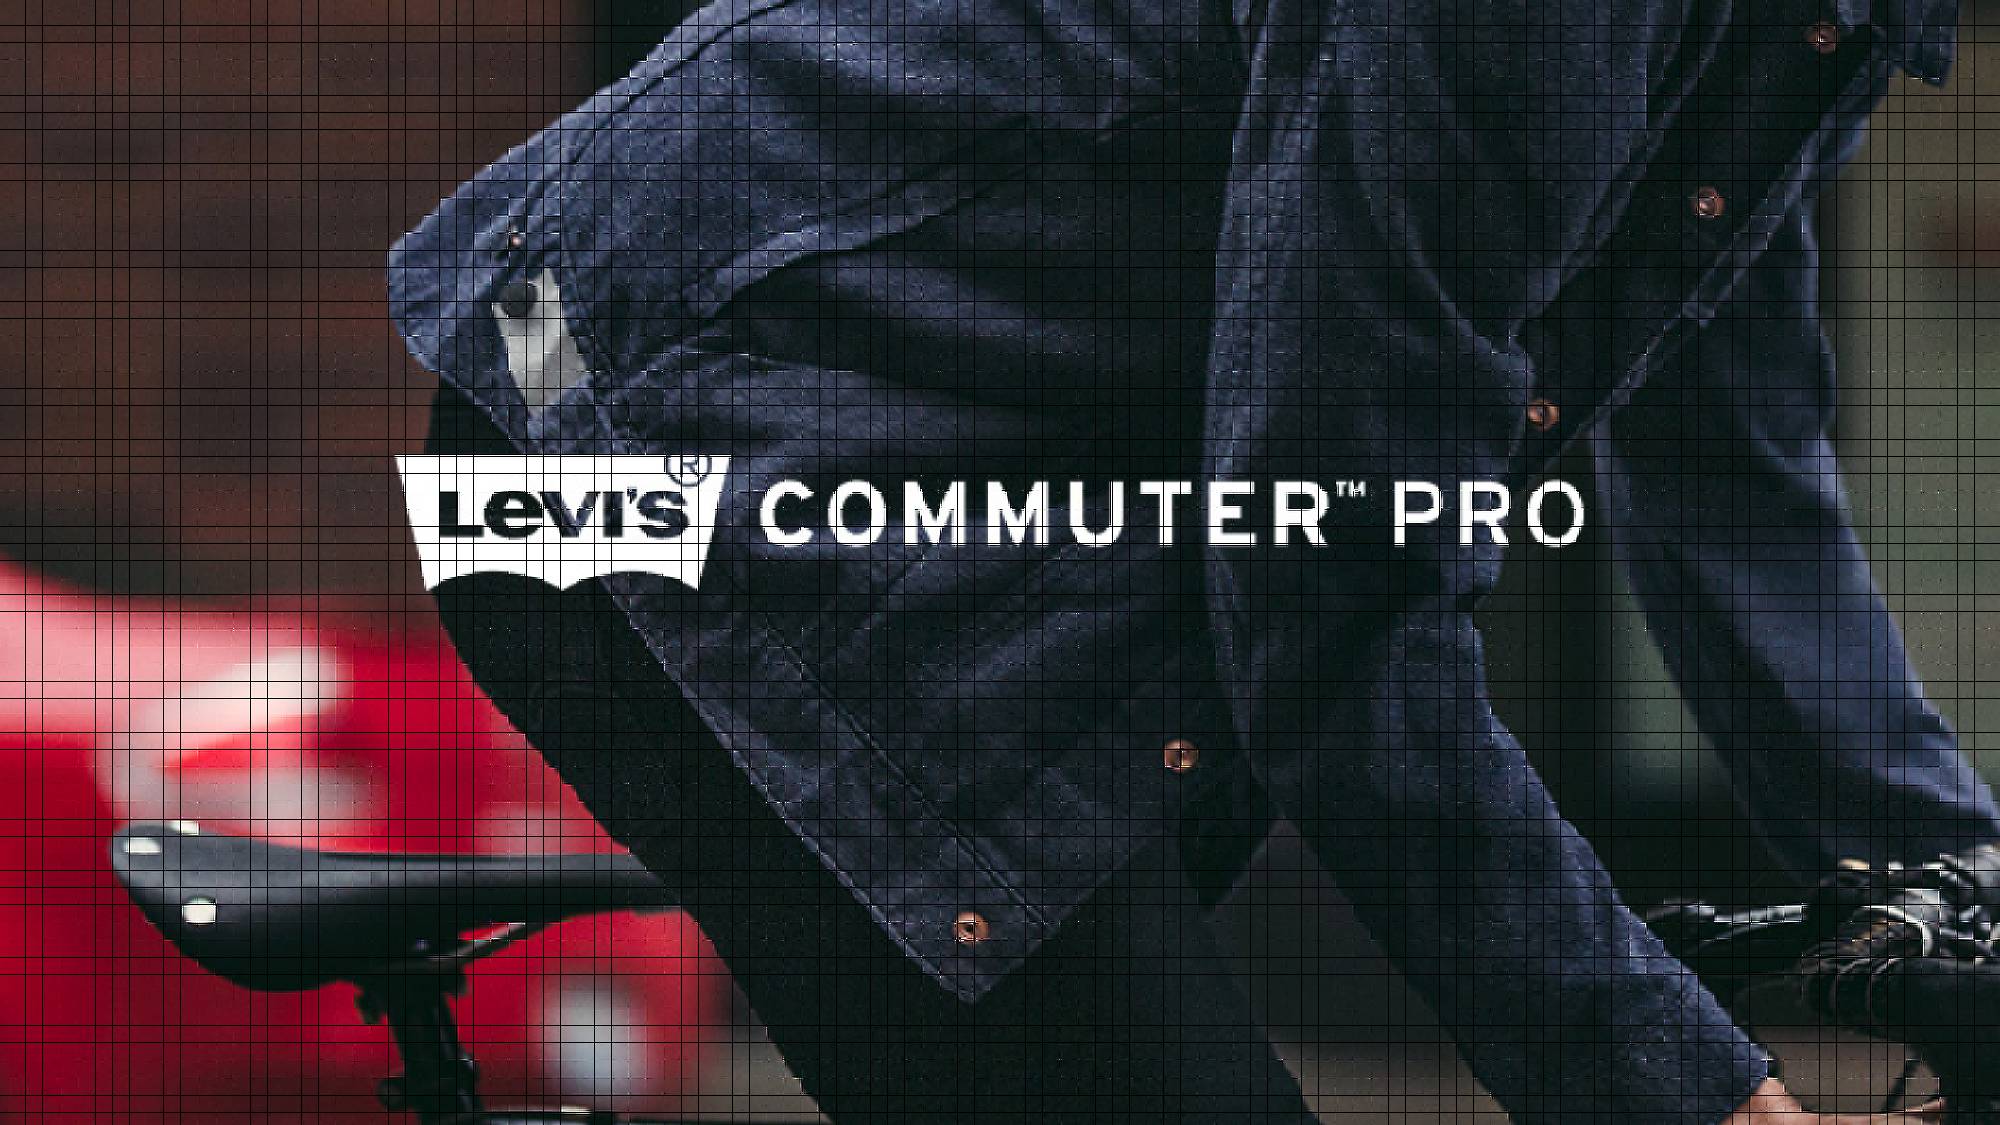 Levi's commuter pro. Man wearing a denim jacket riding a bike. Red car in background.